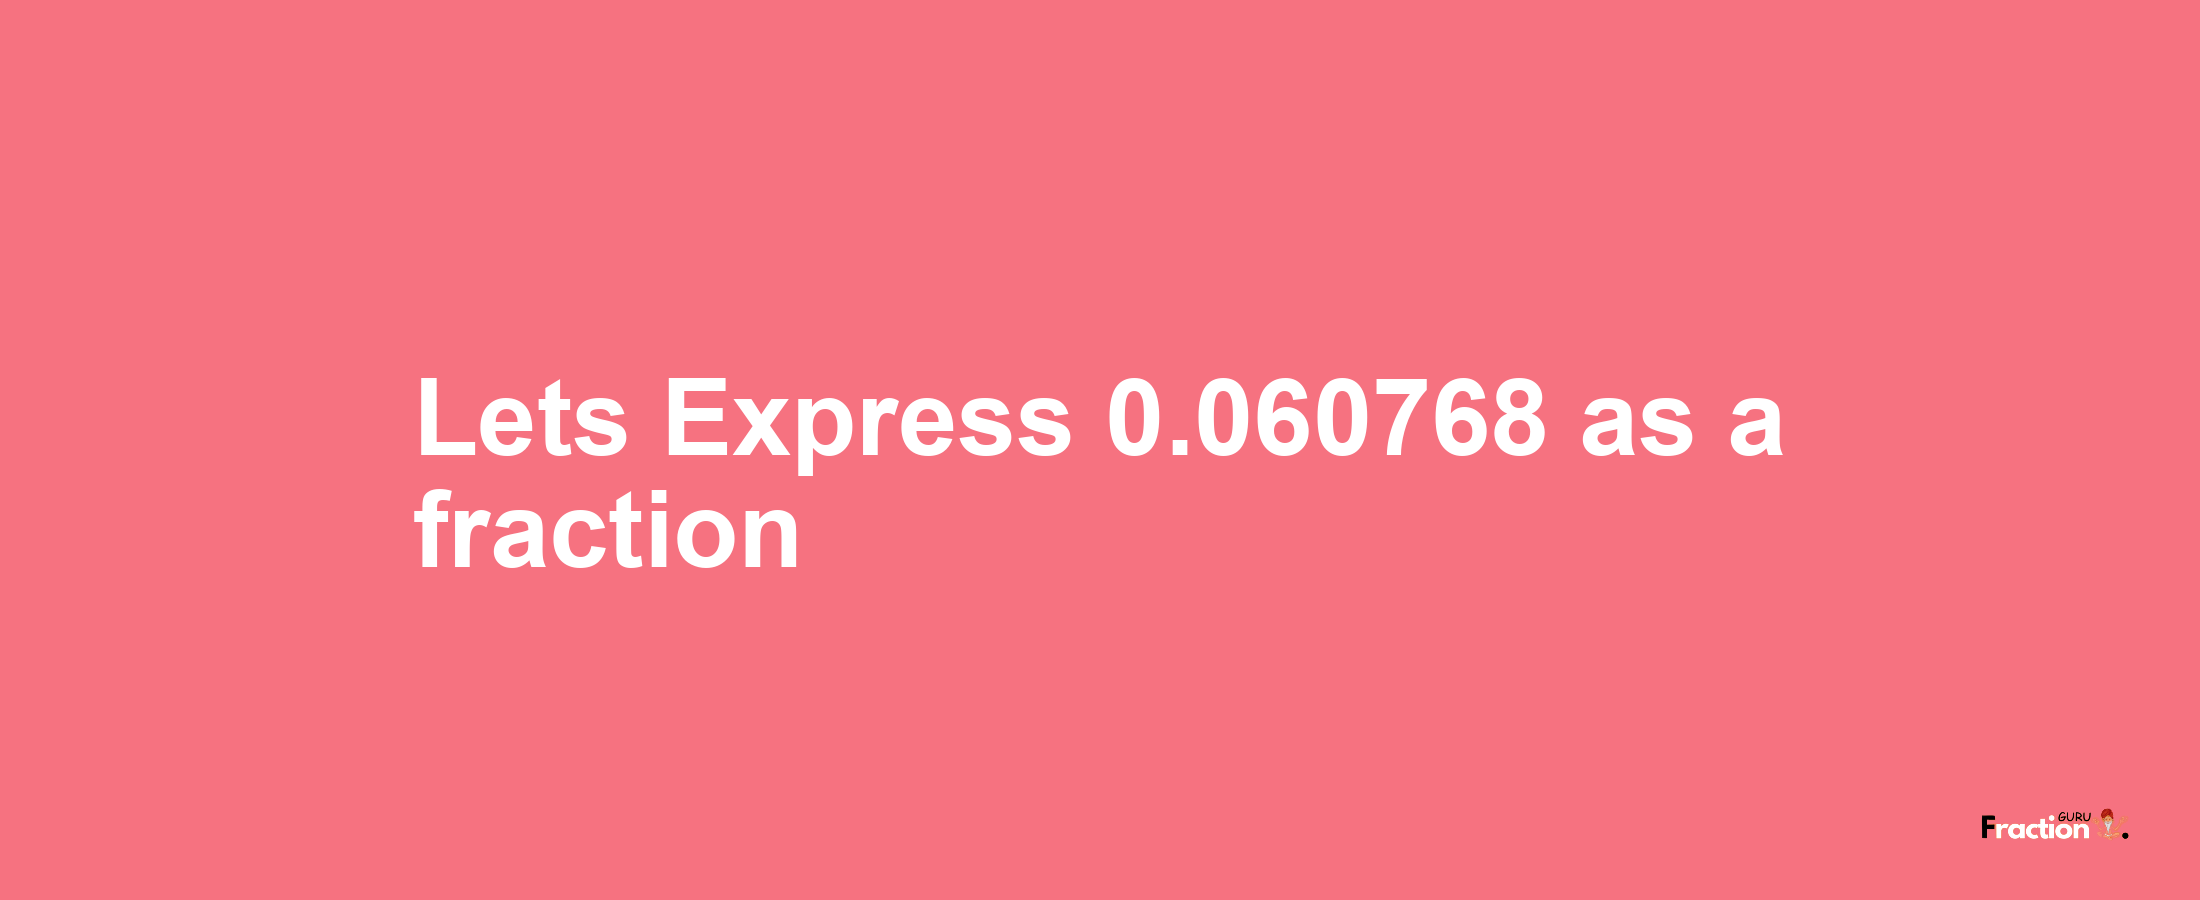 Lets Express 0.060768 as afraction